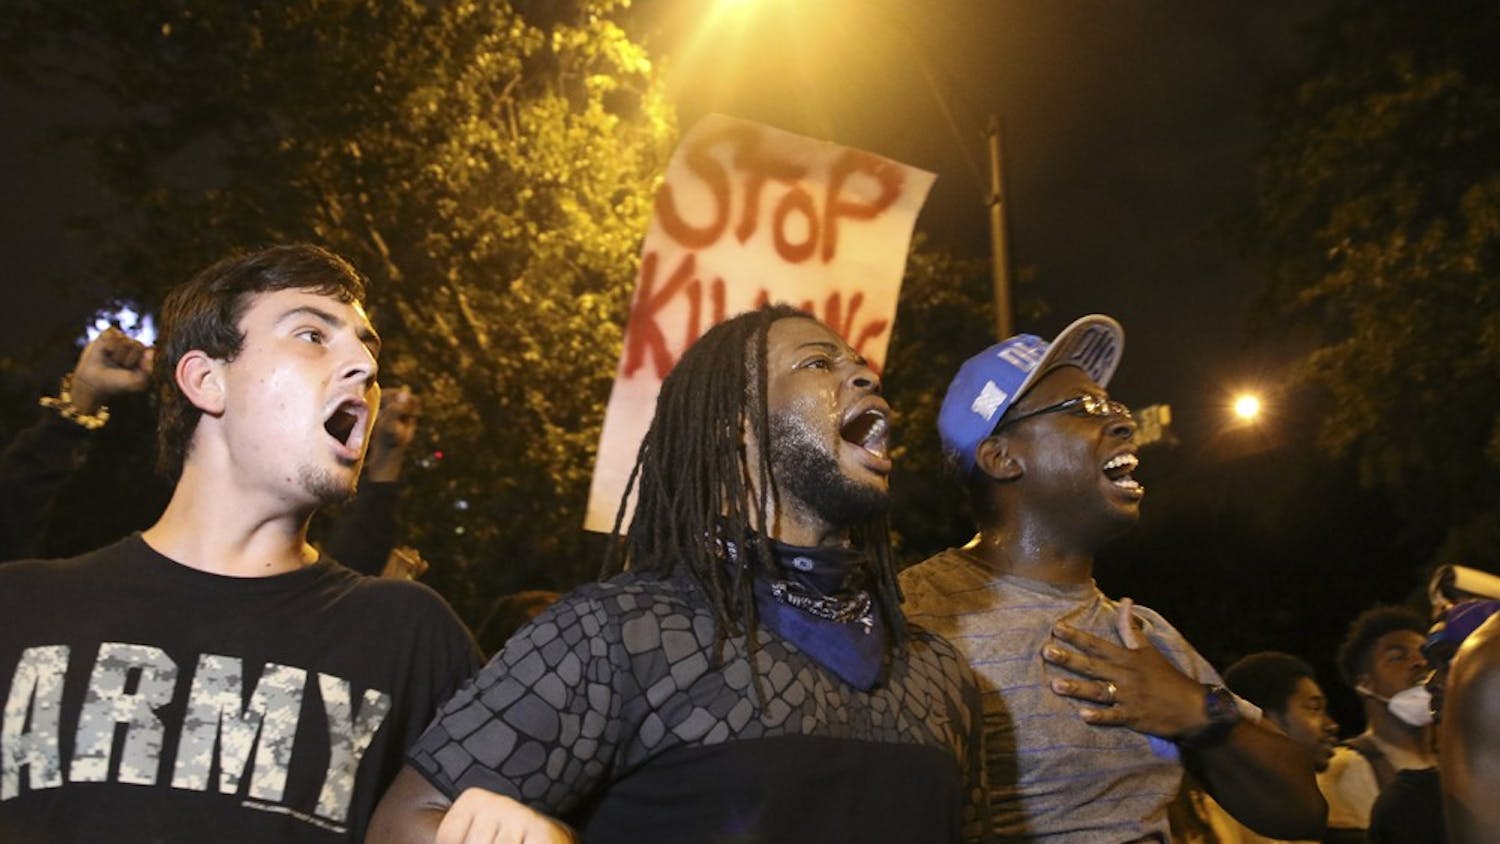 Protestors march through the streets of Charlotte on September&nbsp;22nd in response to the police shooting of Keith Scott.